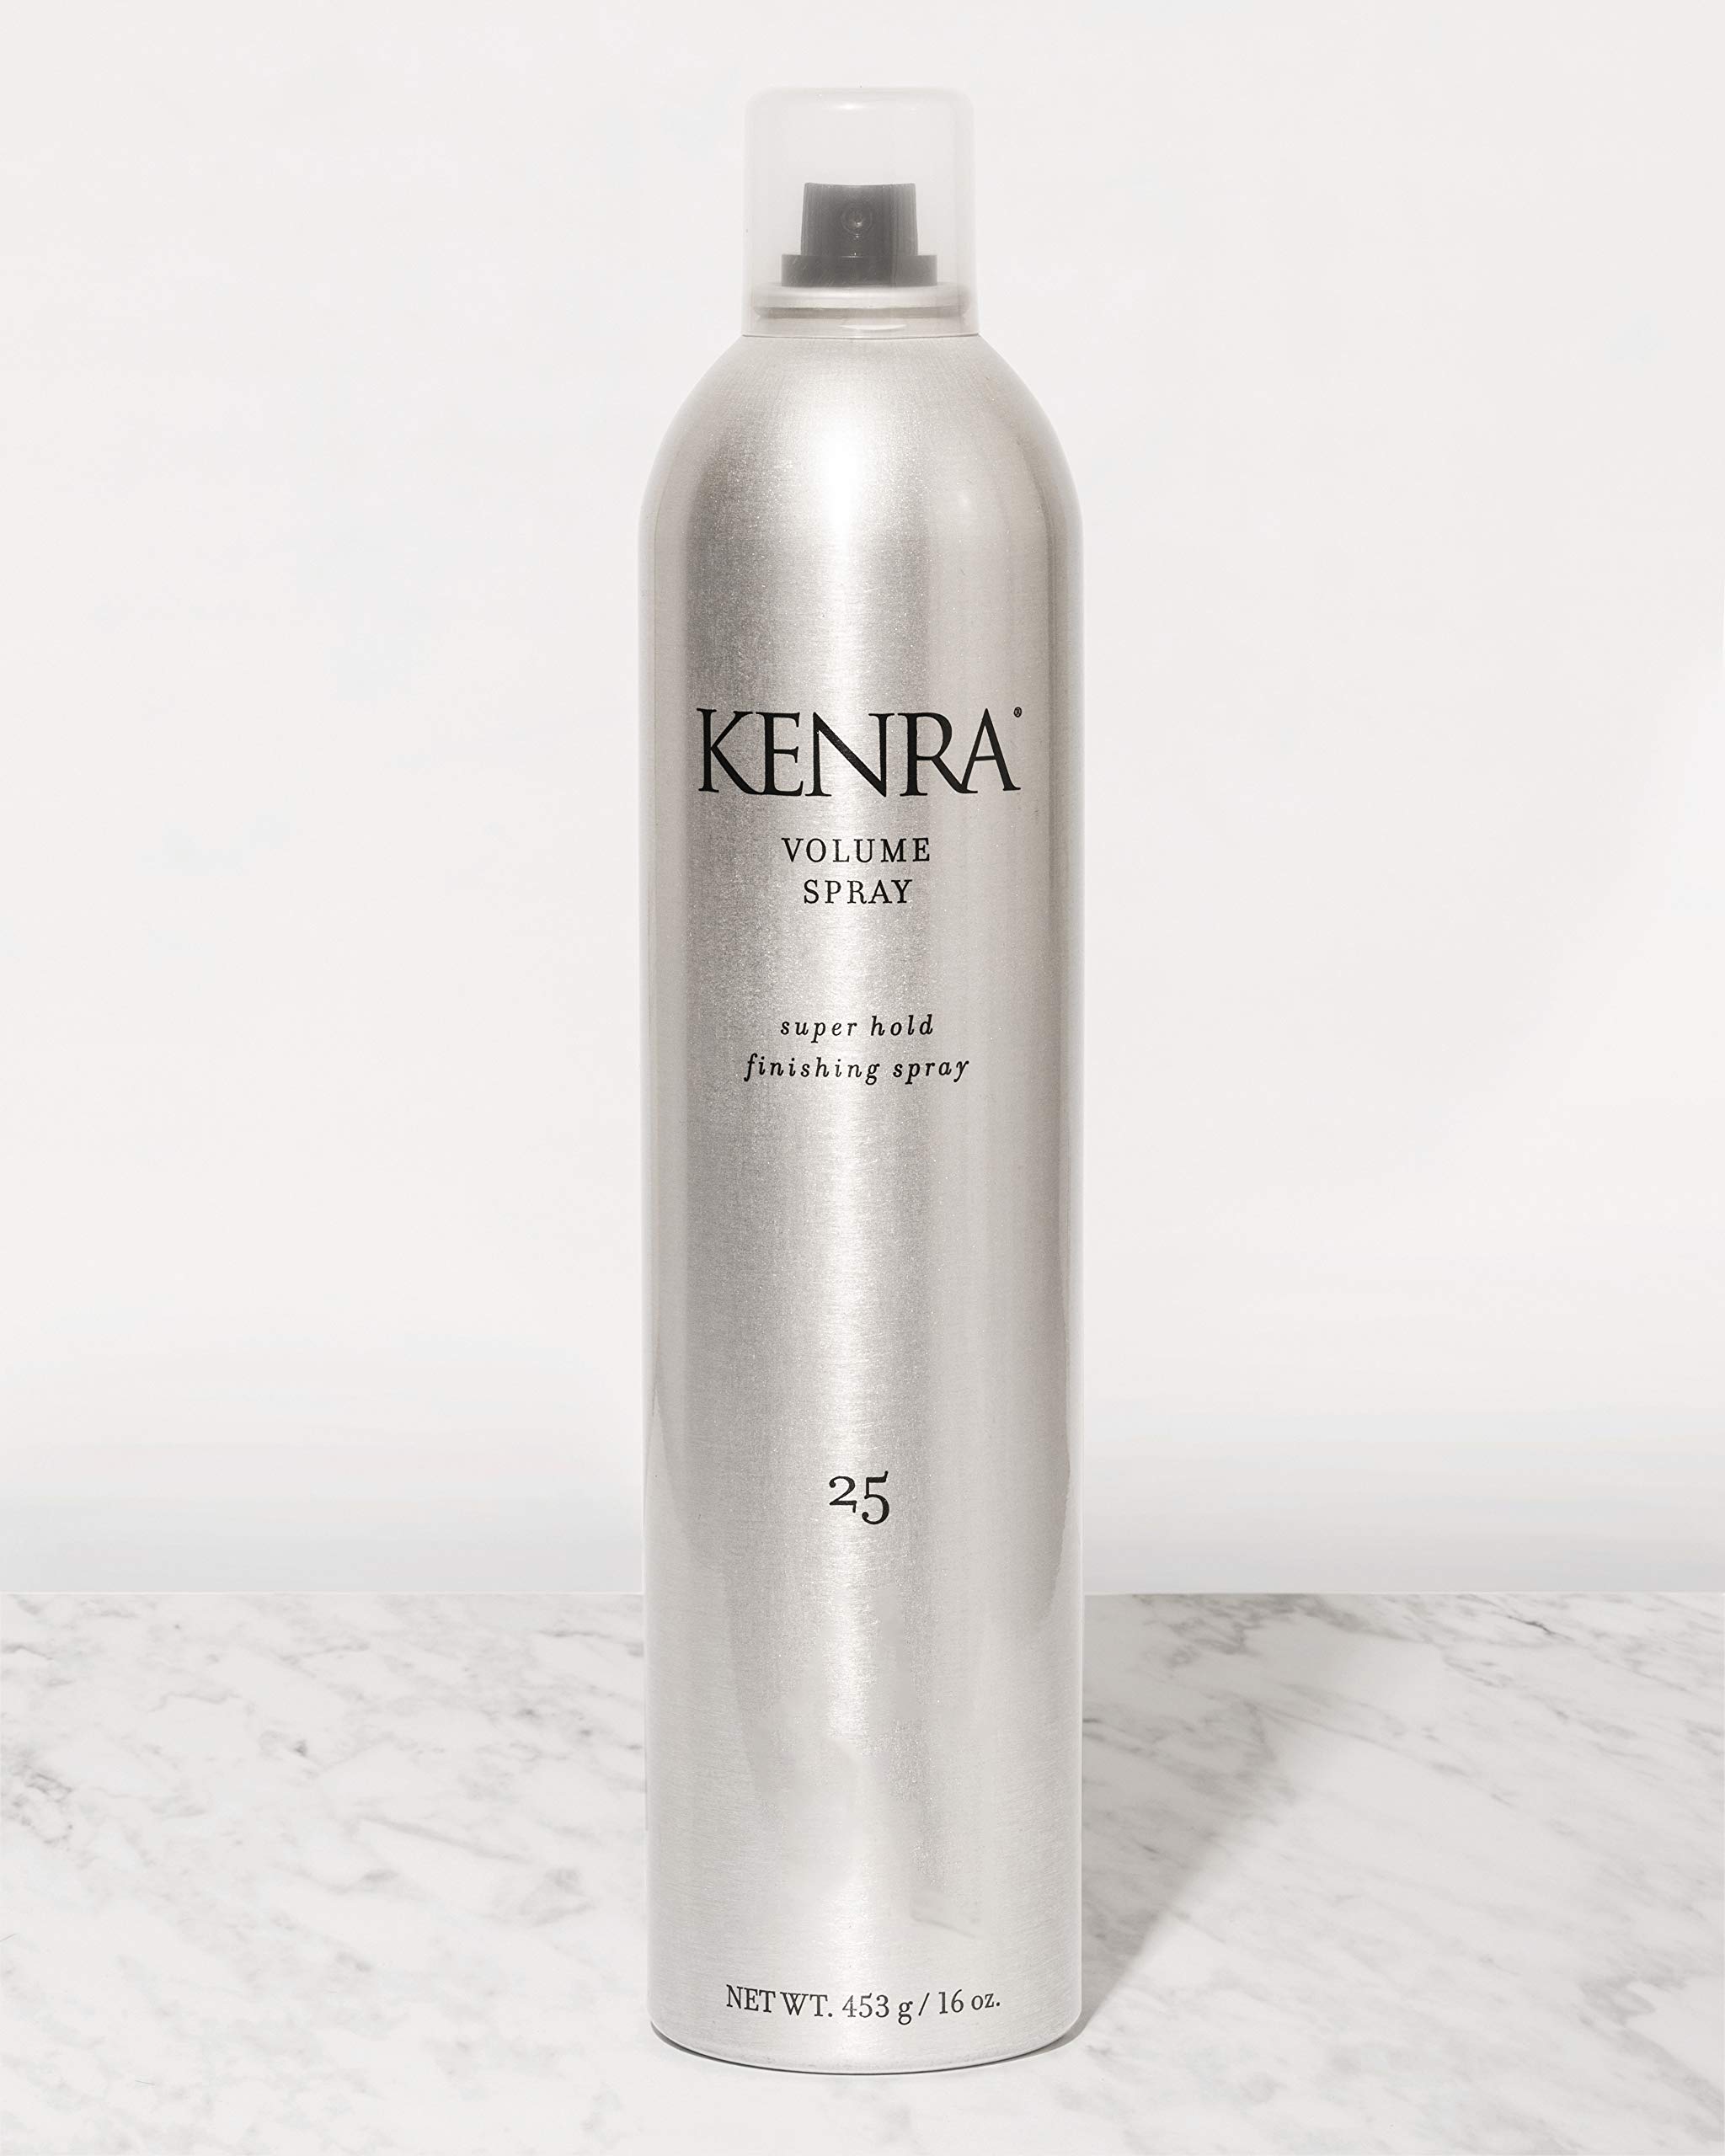 Kenra Volume Spray 25 | Super Hold Finishing & Styling Hairspray | Flake-free & Fast-drying | Wind & Humidity Resistance | All Hair Types